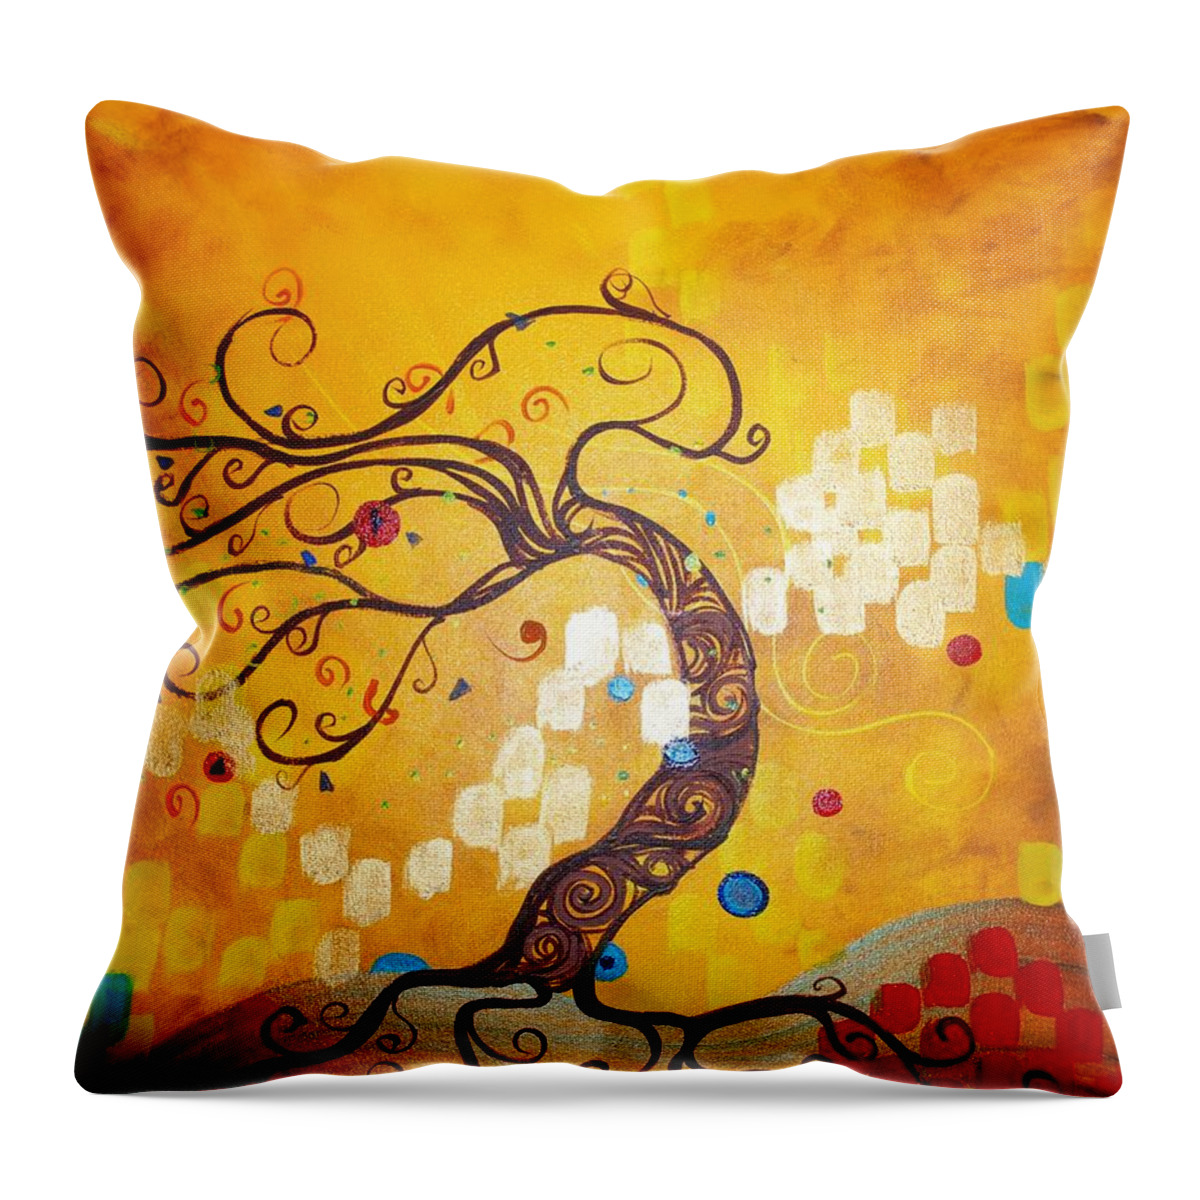  Throw Pillow featuring the painting Life is a Ball by Stefan Duncan